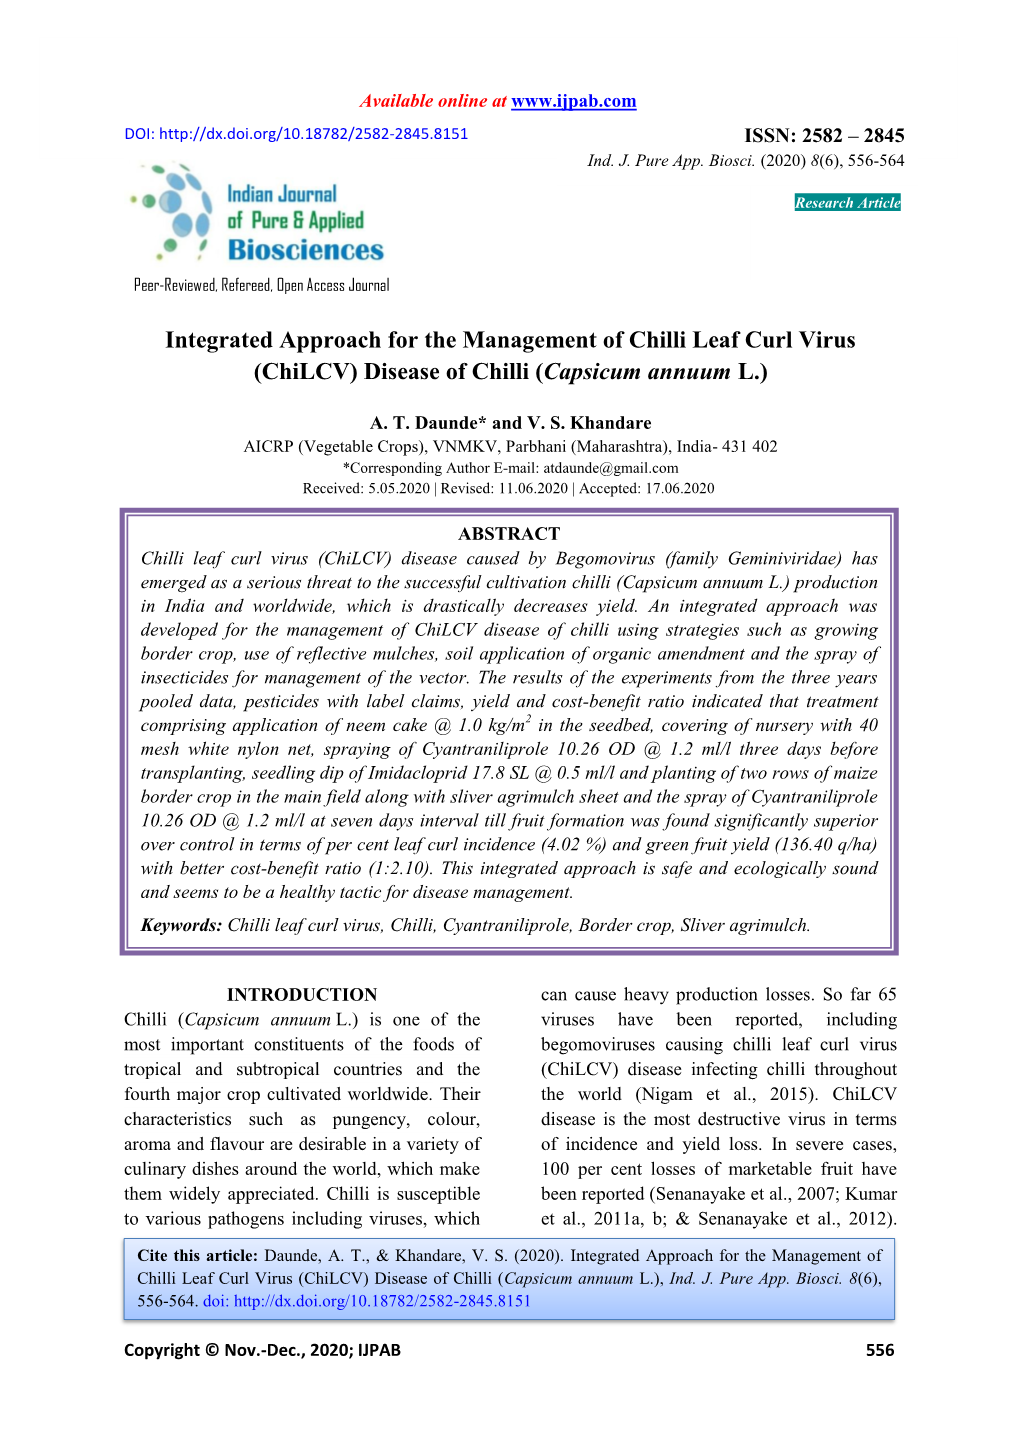 Integrated Approach for the Management of Chilli Leaf Curl Virus (Chilcv) Disease of Chilli (Capsicum Annuum L.)